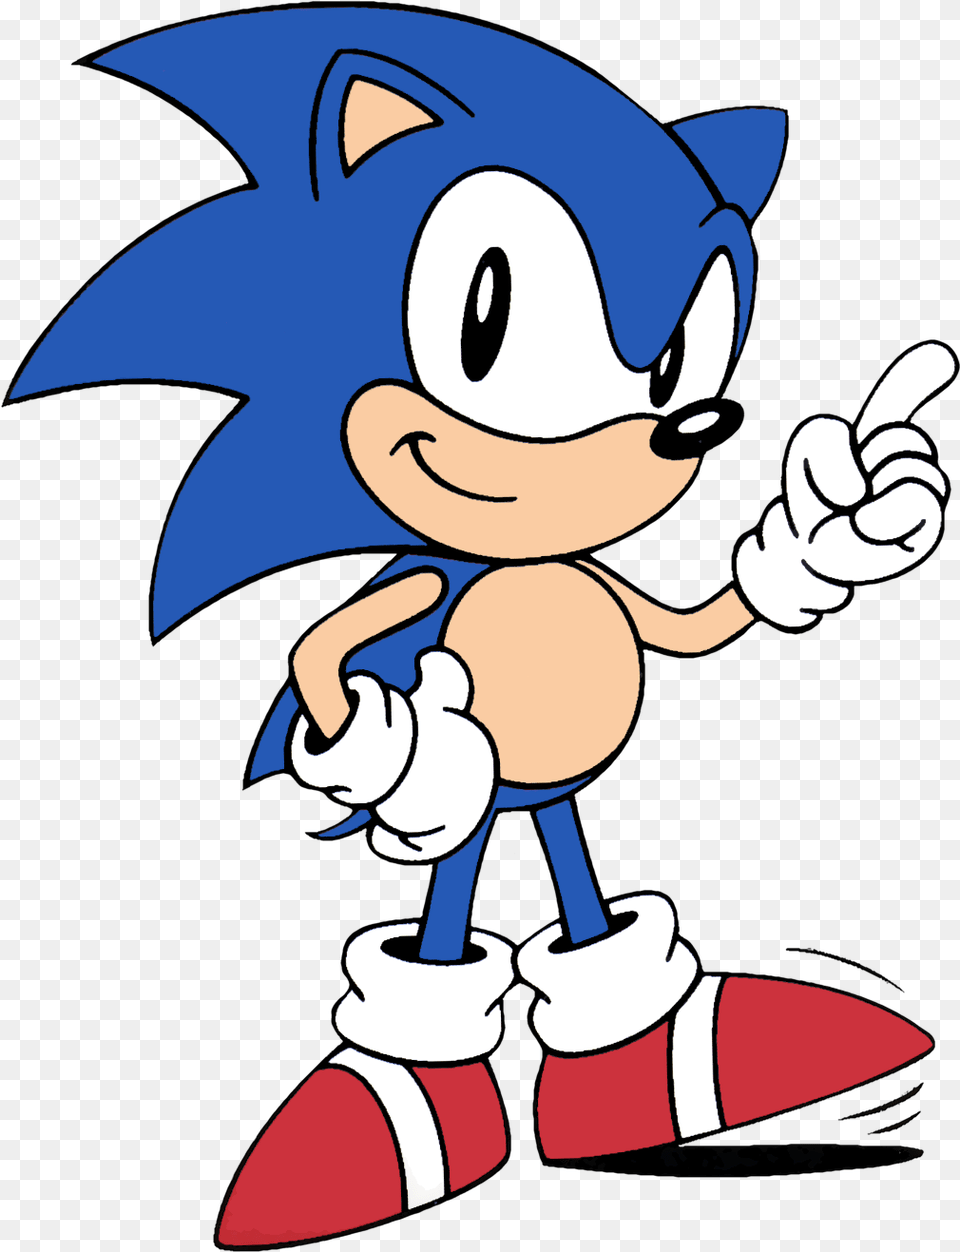 Sonic Nice Image Sonic The Hedgehog Basic, Cartoon, Baby, Person Png